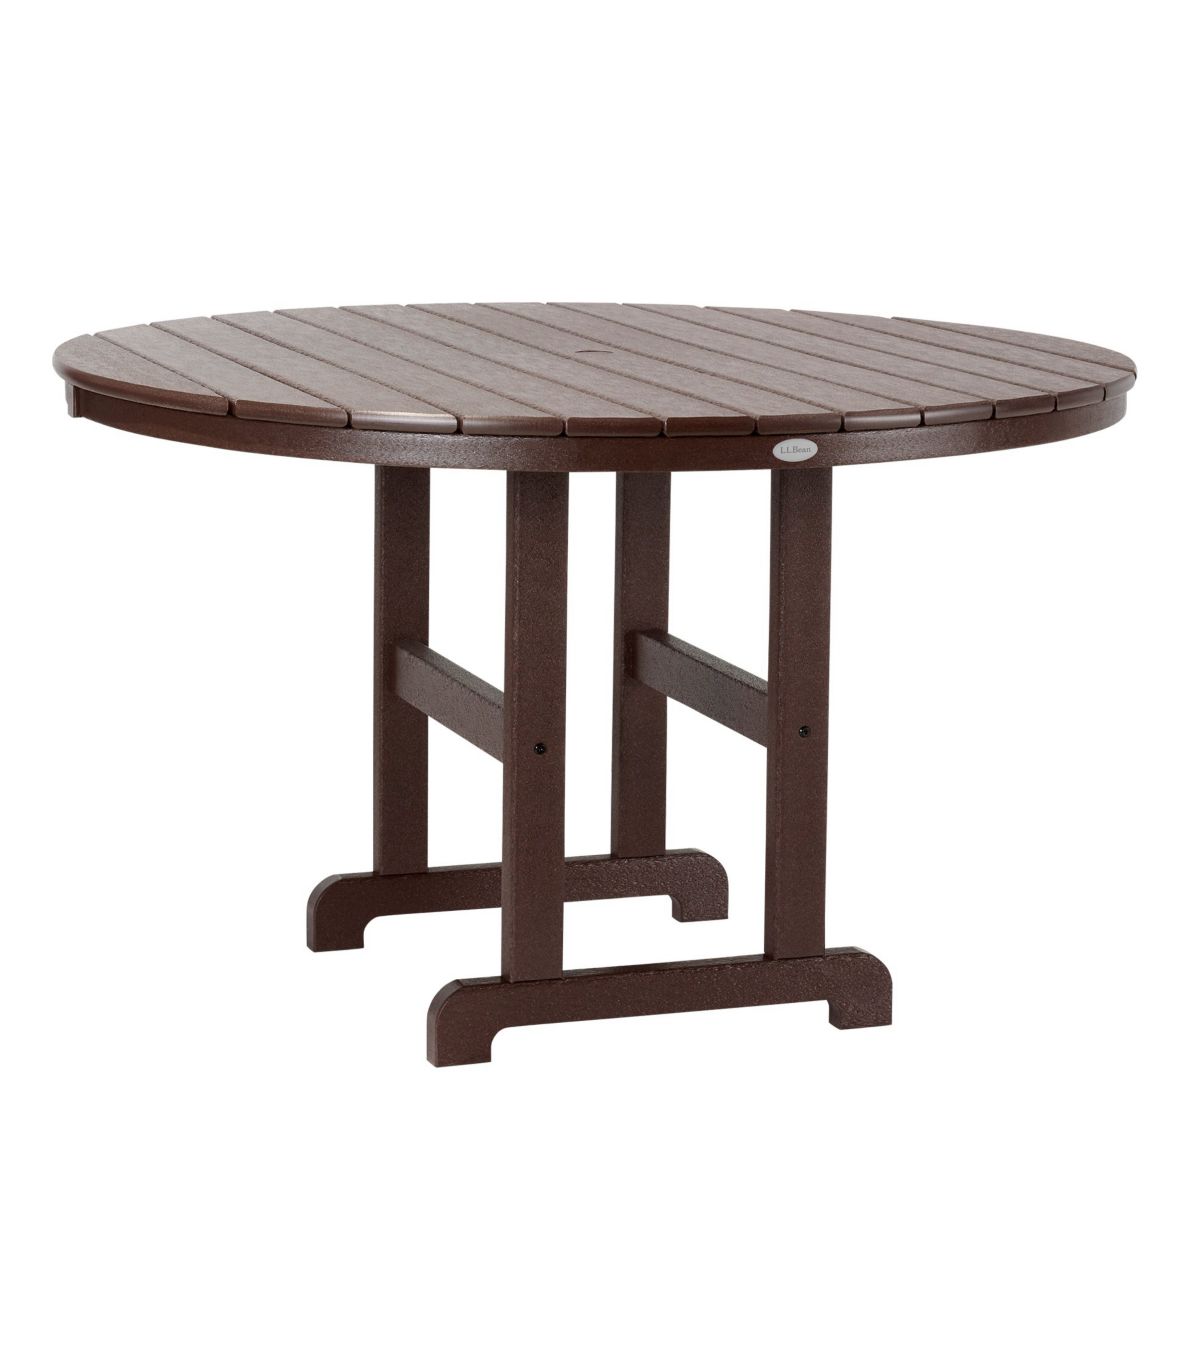 All-Weather Dining Table, Round 48"